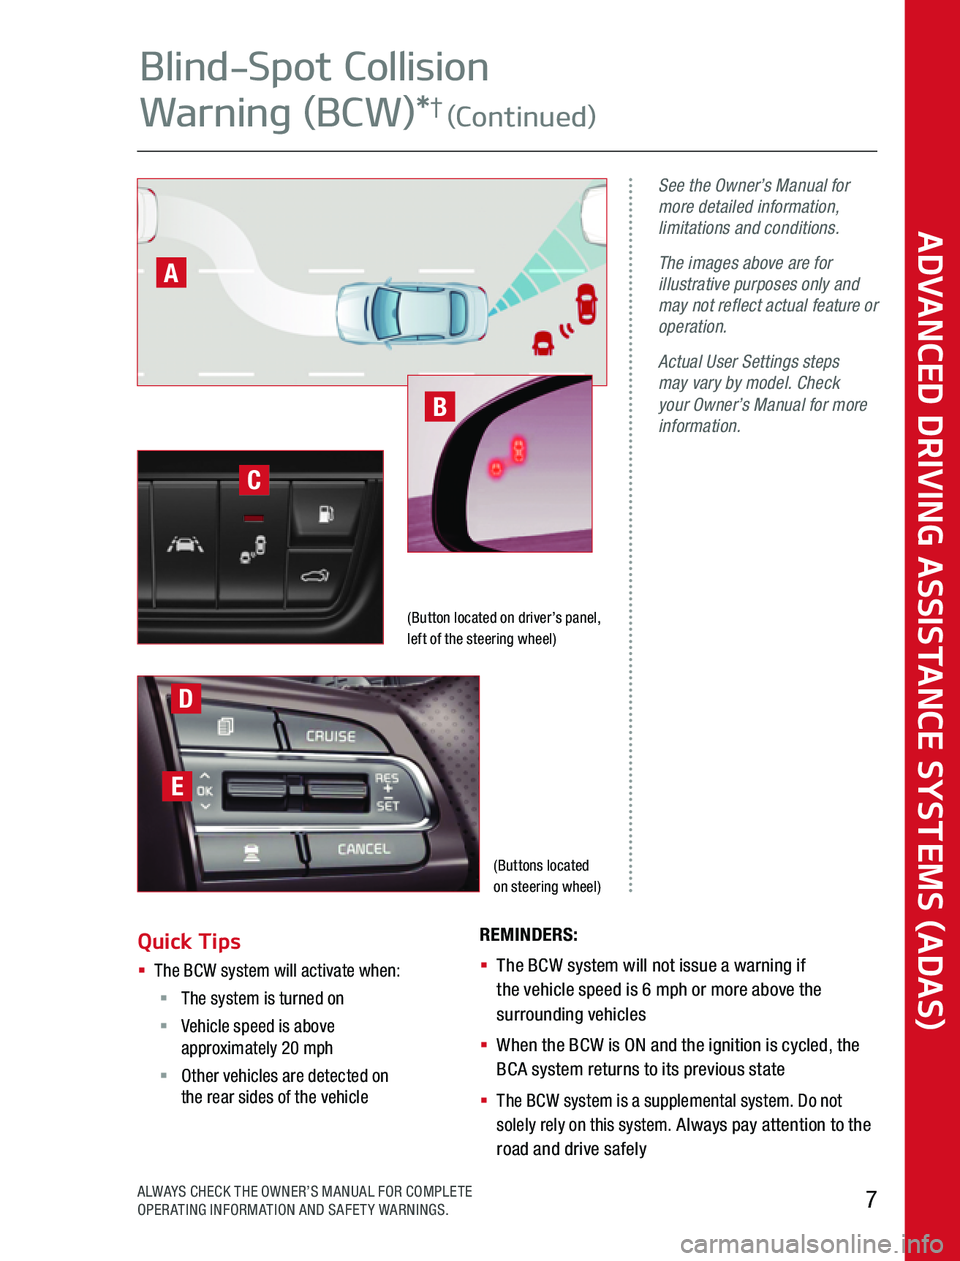 KIA RIO 2020  Advanced Driving Assistance System (Buttons located  on steering wheel)
See the Owner’s Manual for more detailed information, limitations and conditions.
The images above are for illustrative purposes only and may not reflect actual 